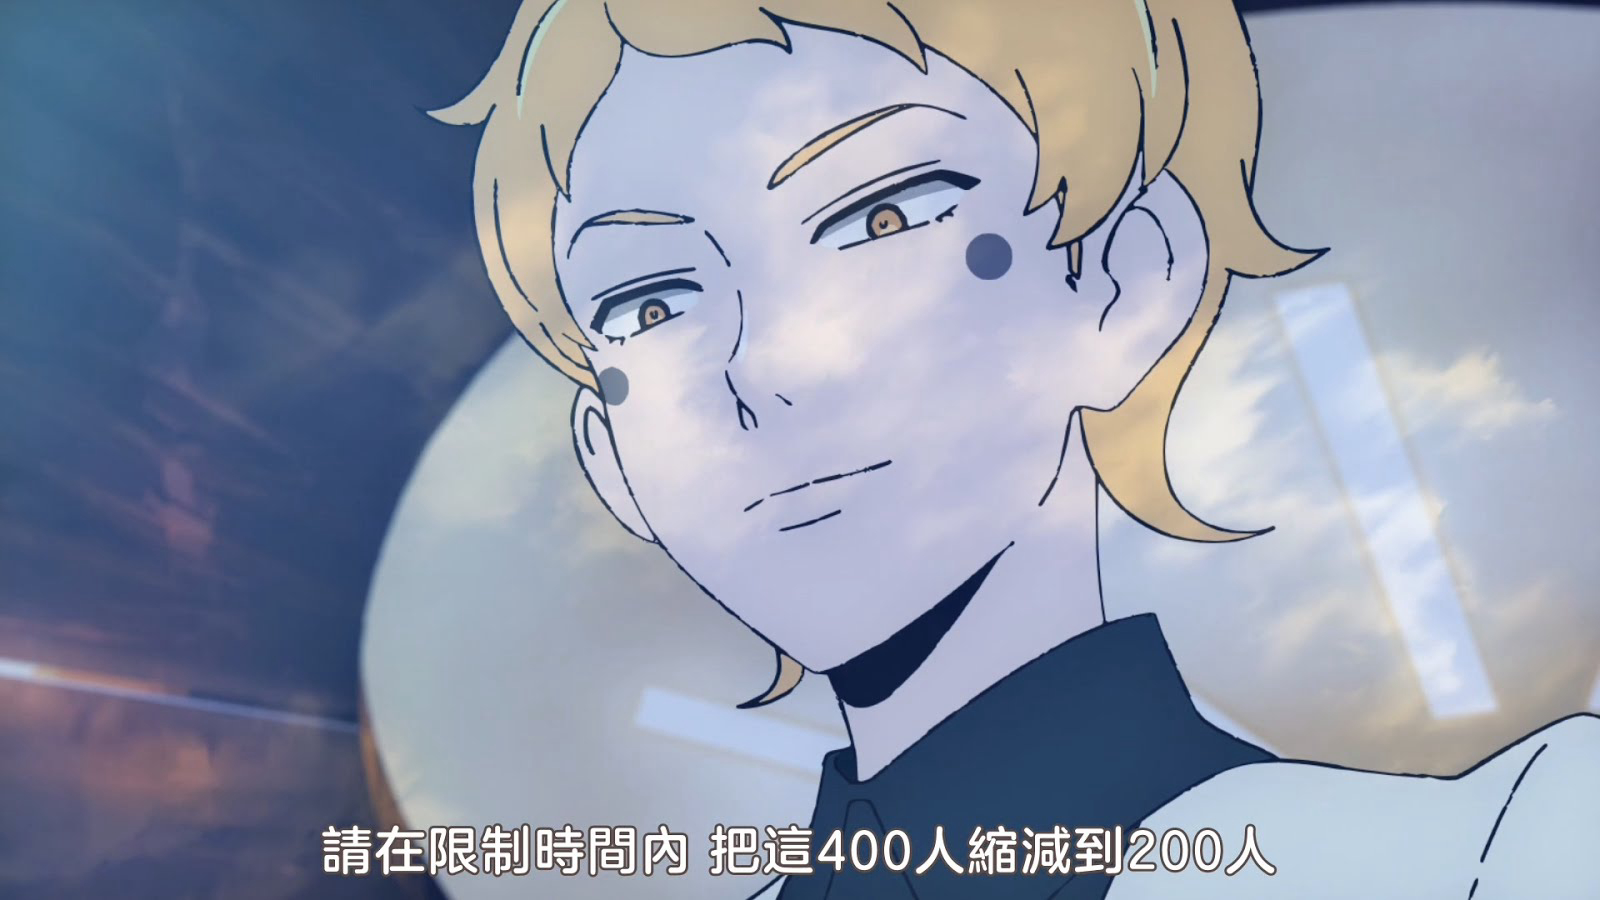 Tower of God - 神之塔 -Tower of God- (2020)